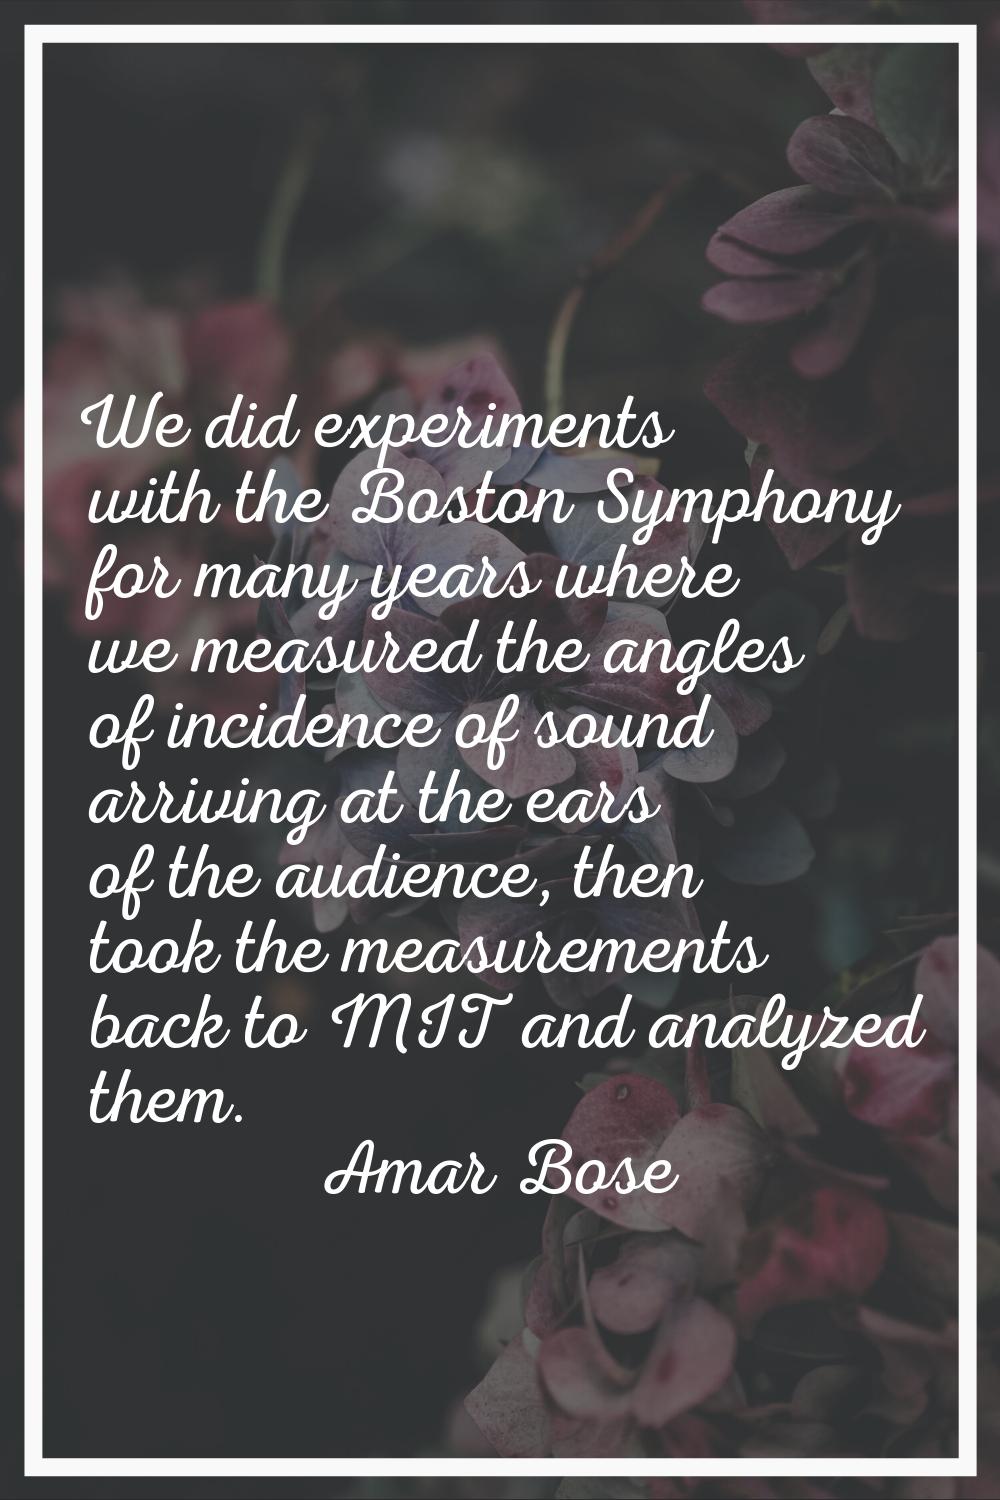 We did experiments with the Boston Symphony for many years where we measured the angles of incidenc